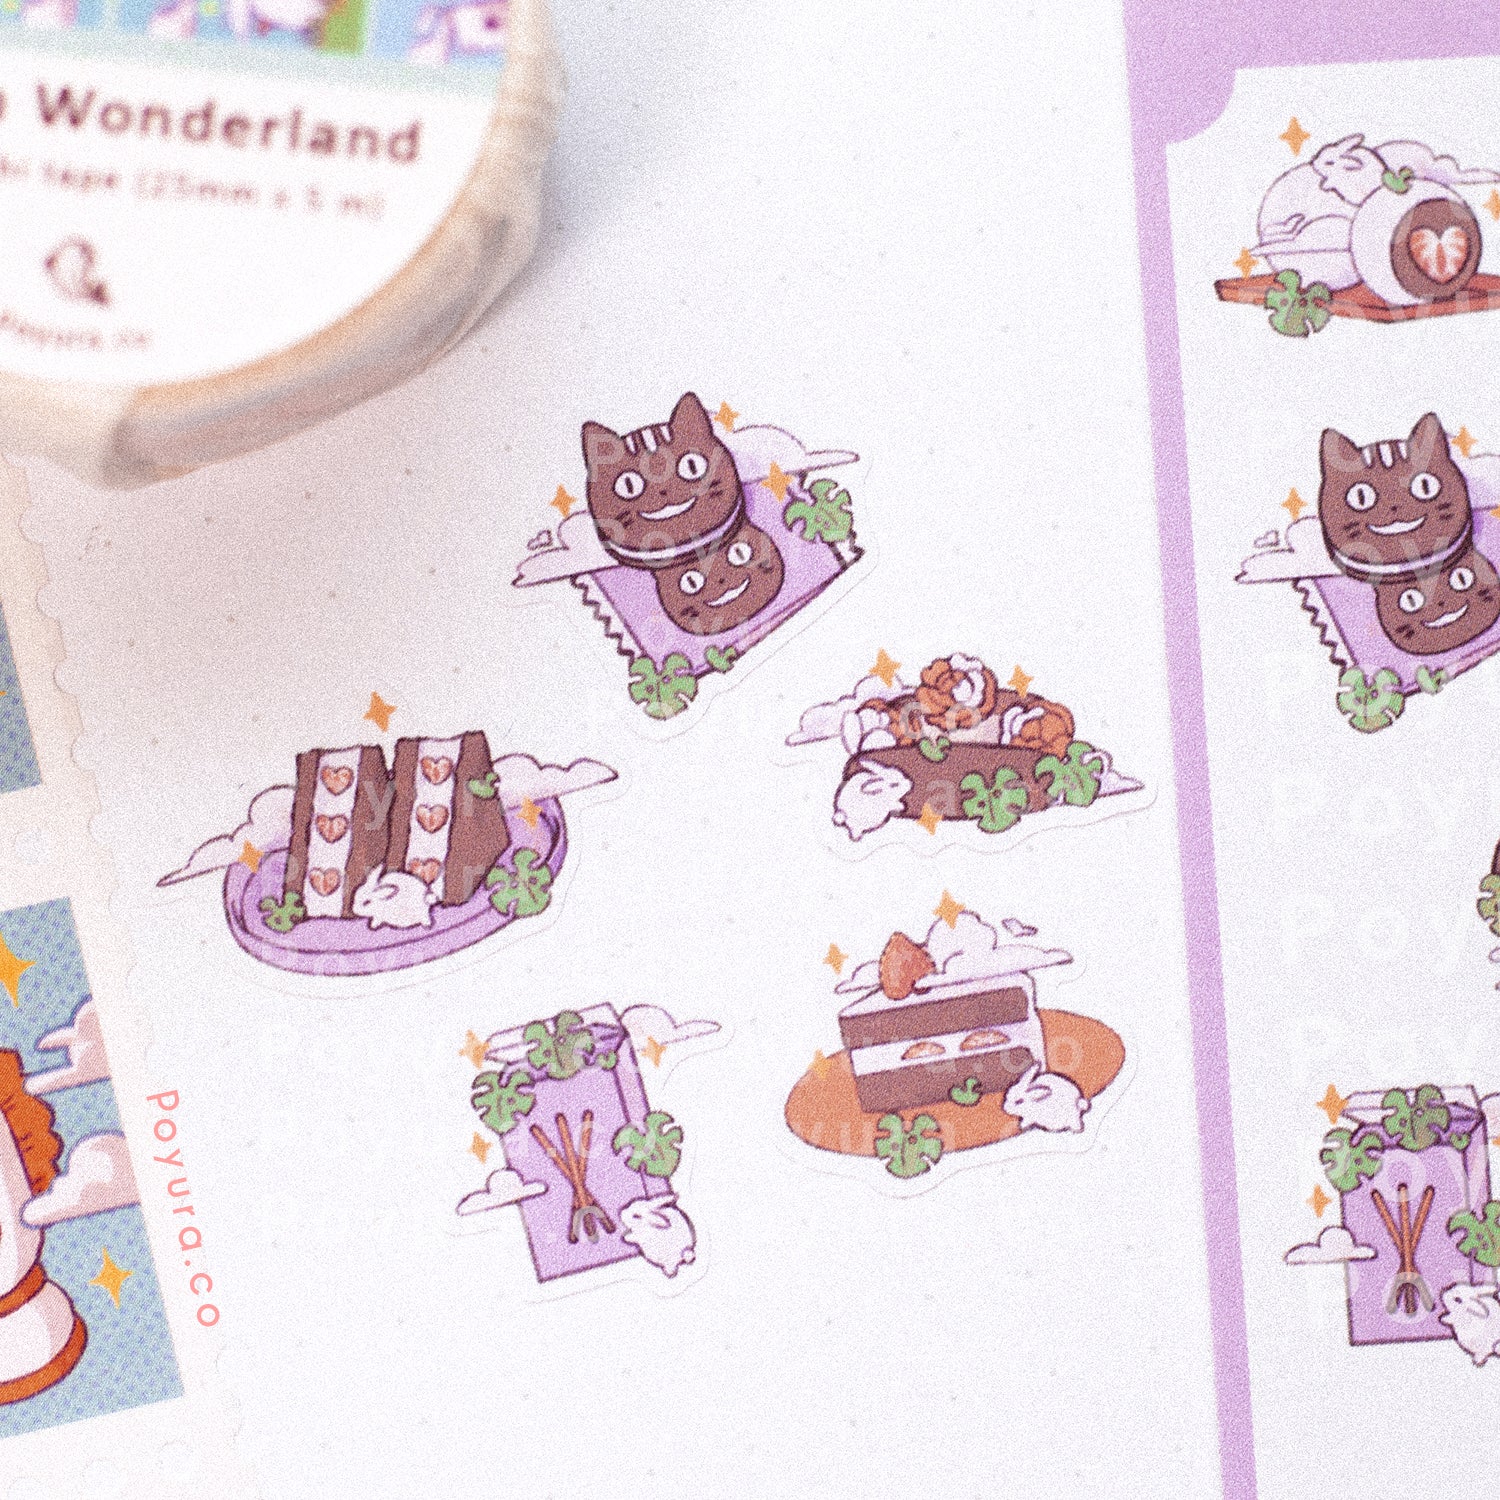 Alice in wonderland sticker sheet Japanese Korean cute aesthetic stationery polco kpop journal toploader deco mad hatter cat bunny watch playing card rose flower chess queen of heart high tea party mushroom blue